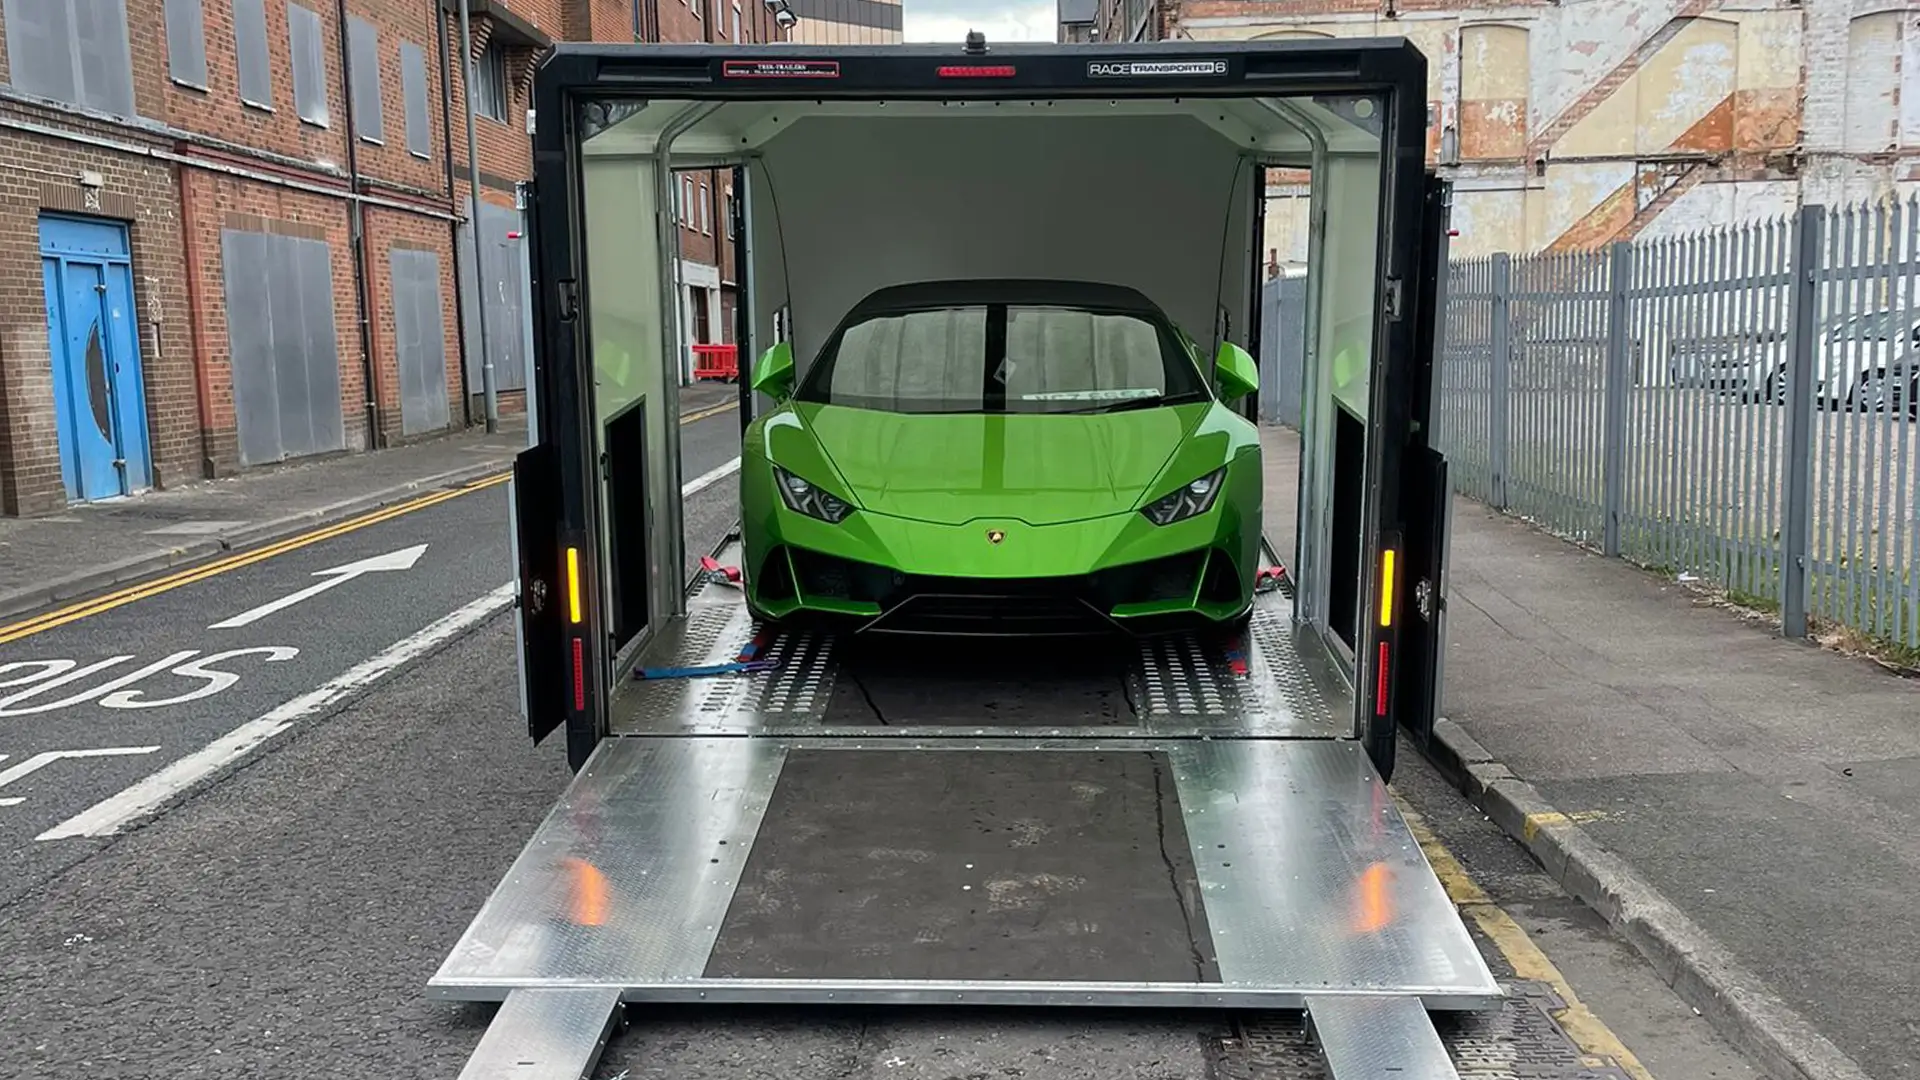 Car Transport Service in the UK